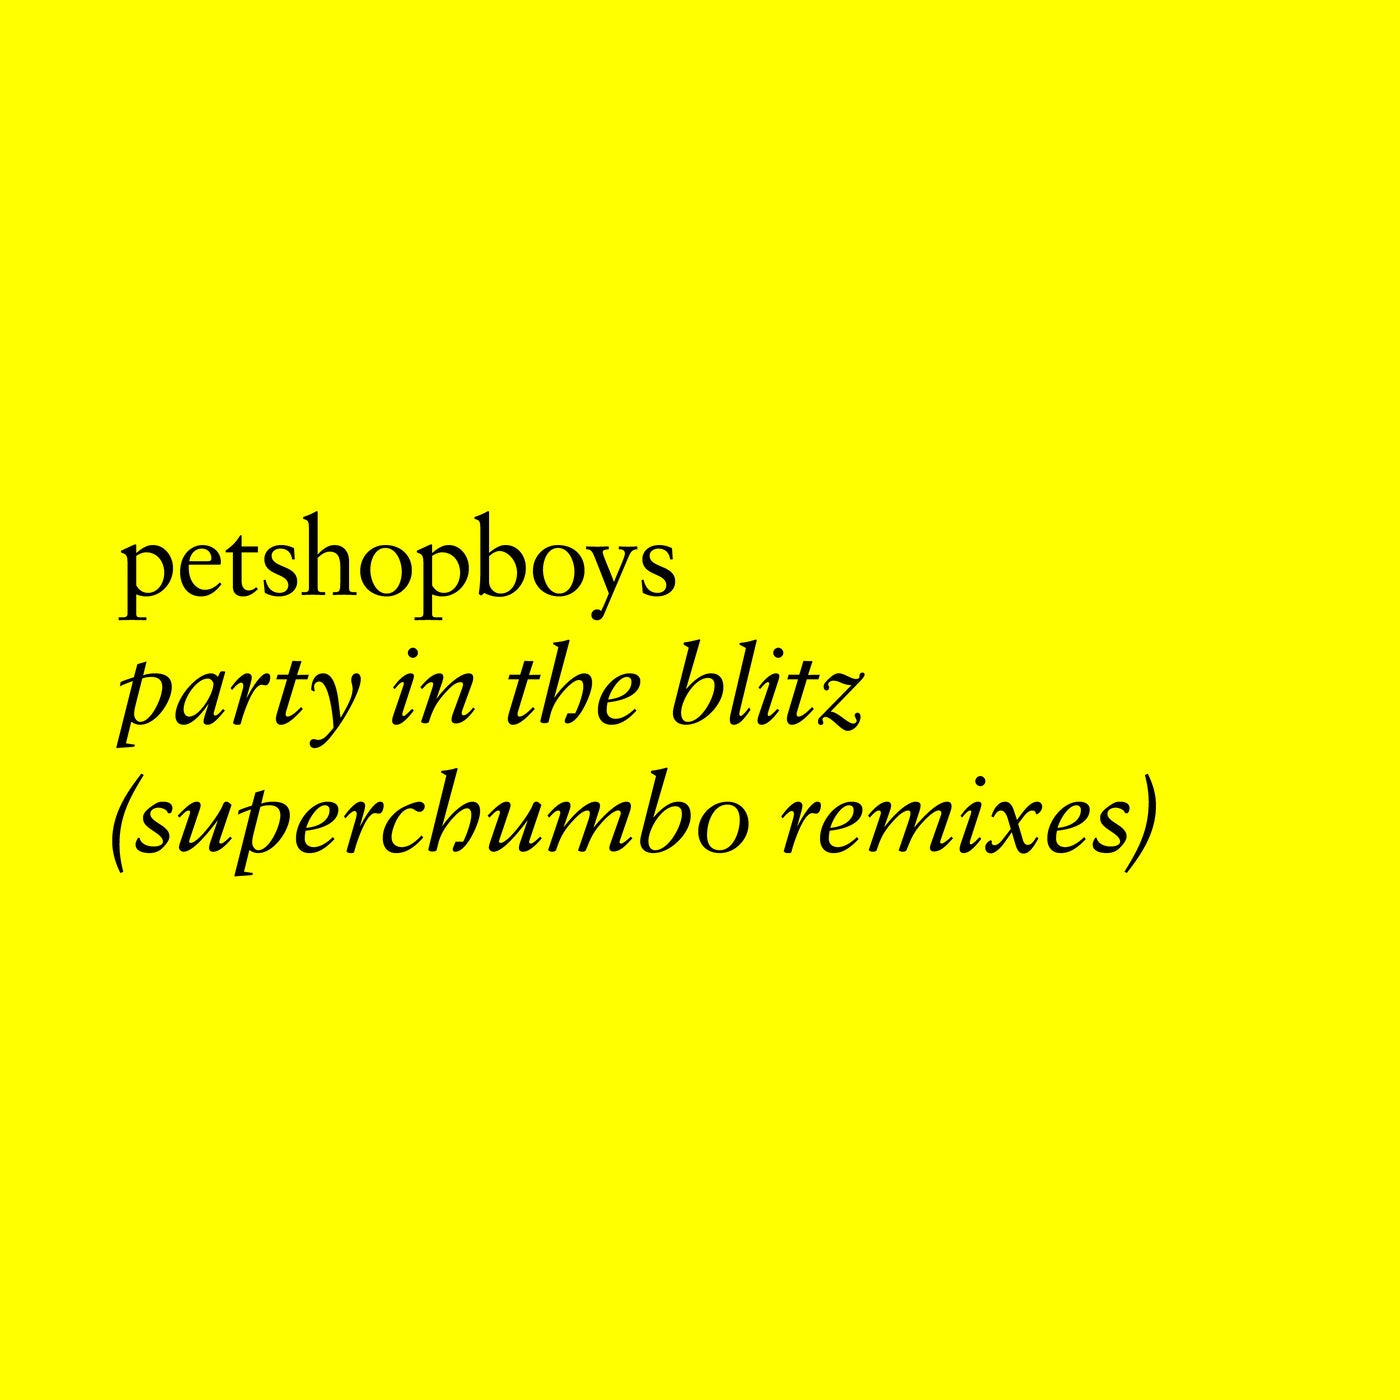 Cover - Pet Shop Boys - Party in the Blitz (Superchumbo remix)